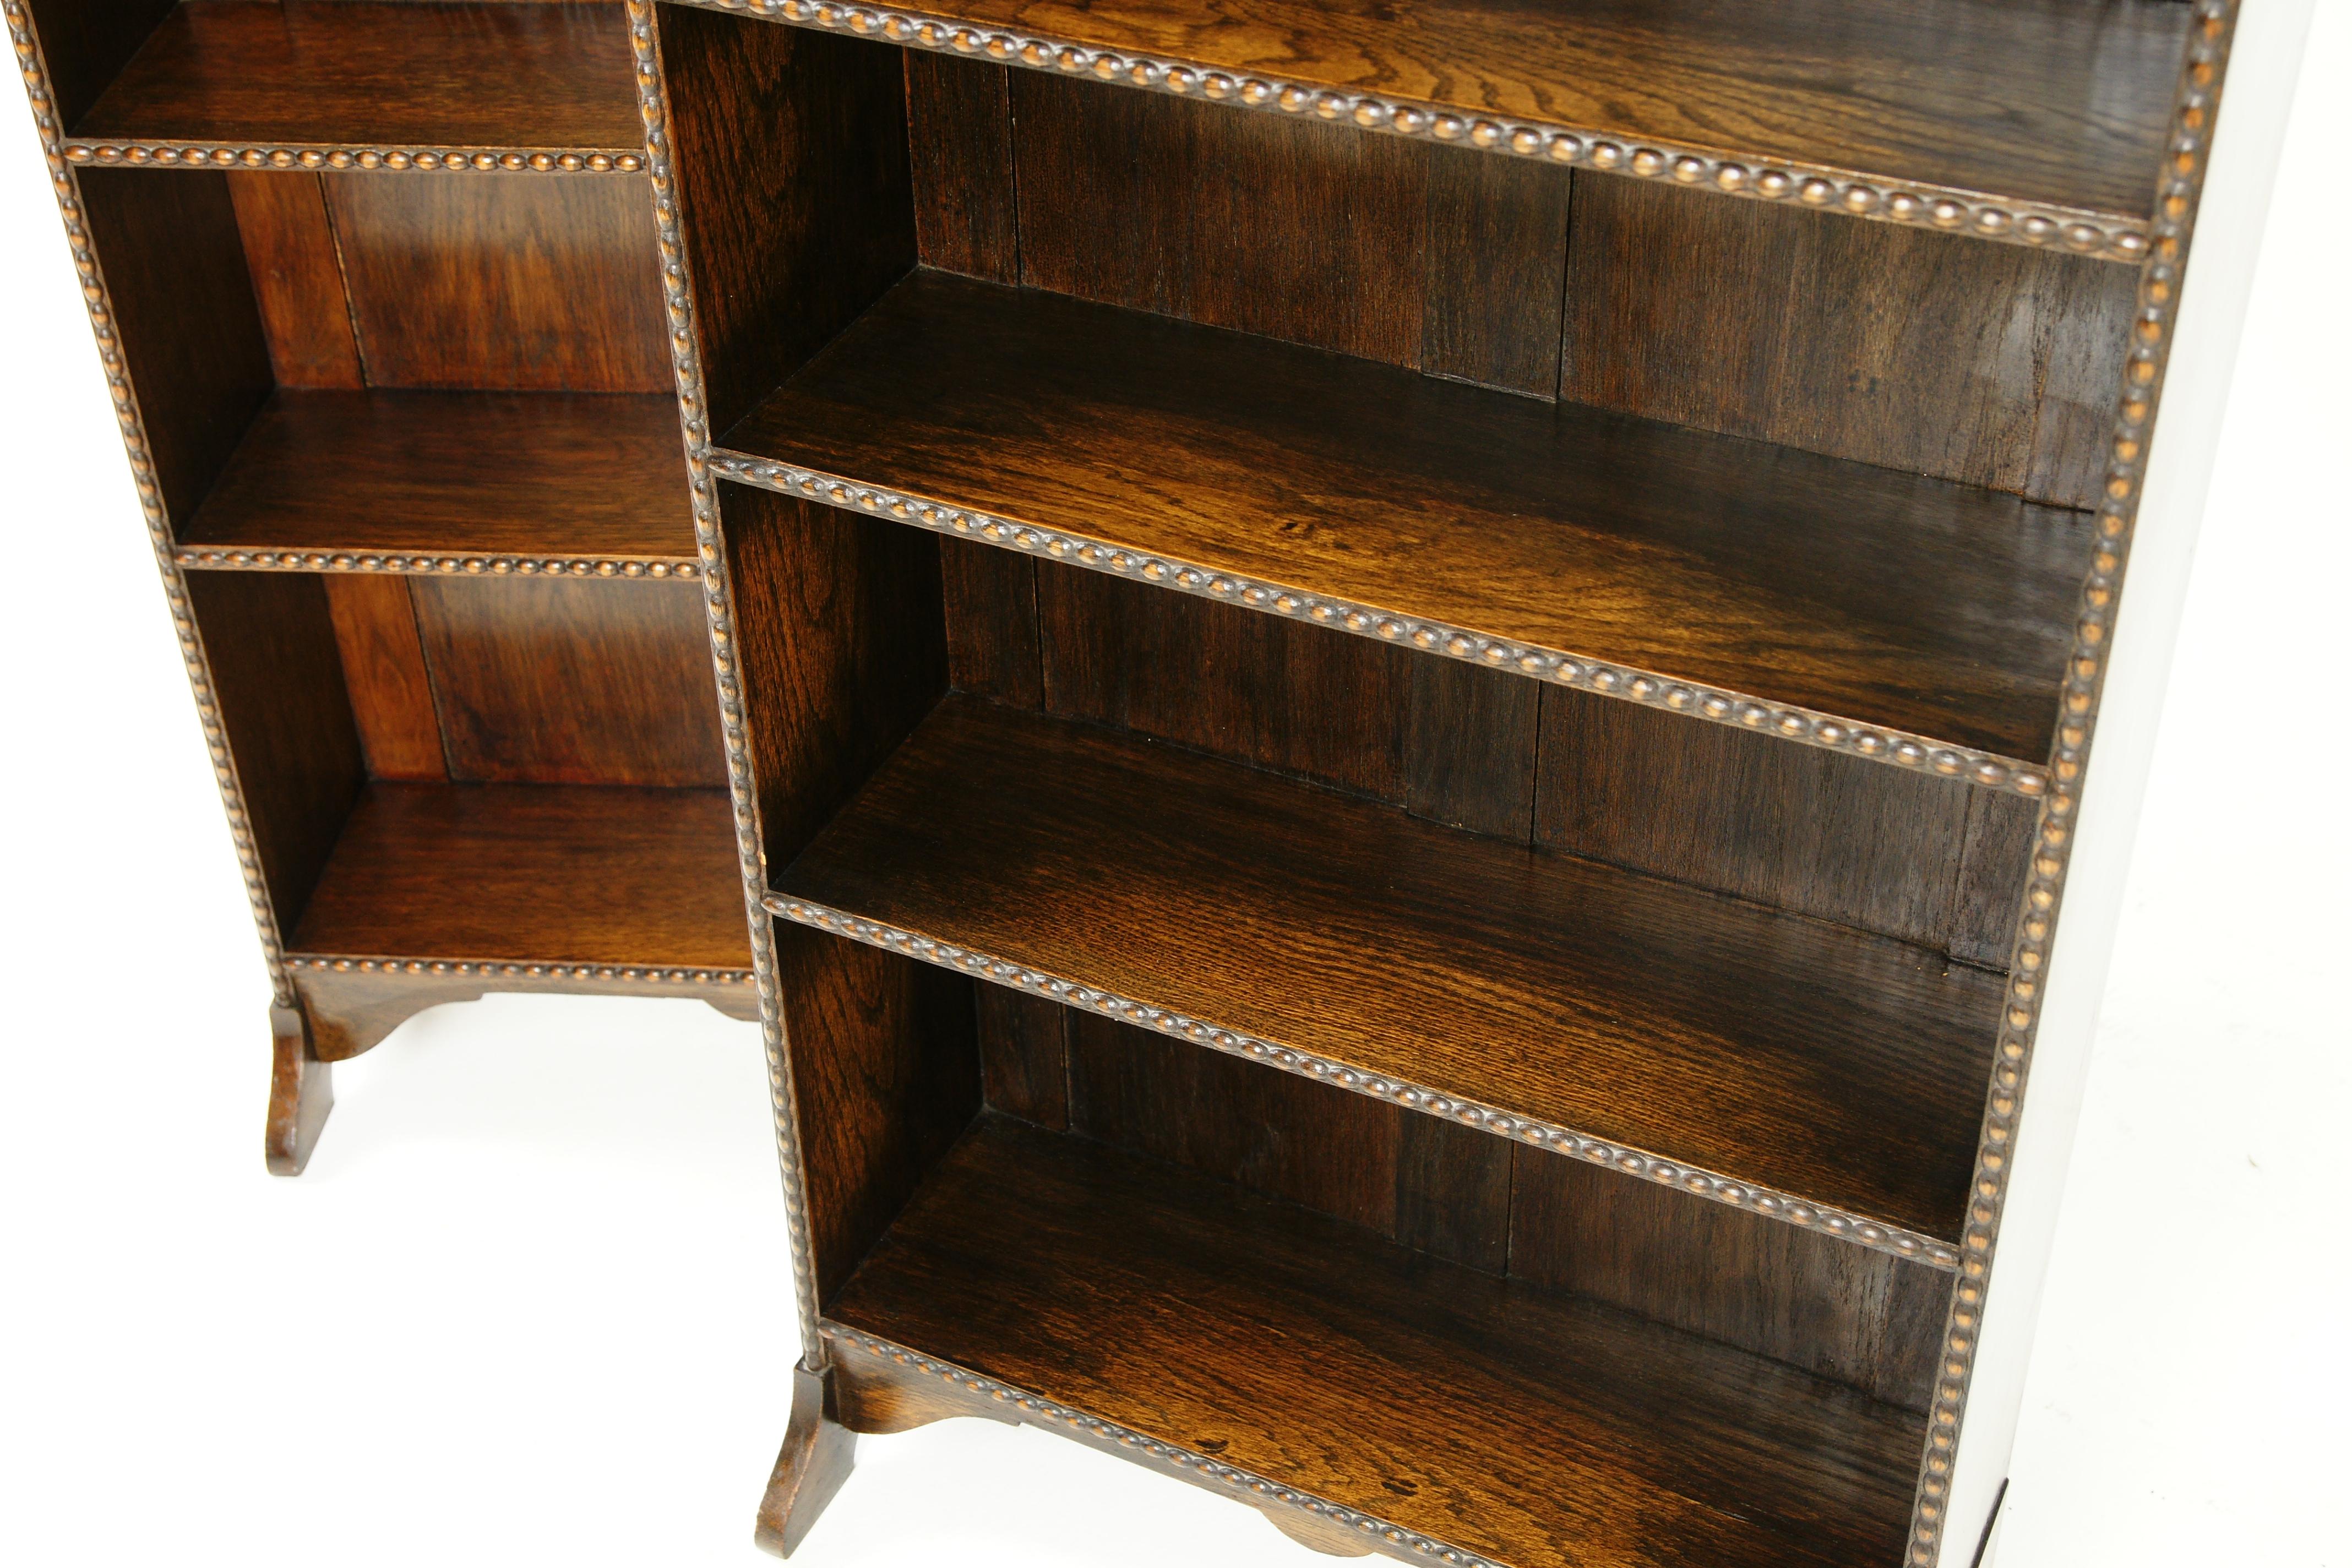 Hand-Crafted Antique Matching Oak Bookcases, 5 Tier Open Bookcase, Graduating Shelves, B2388